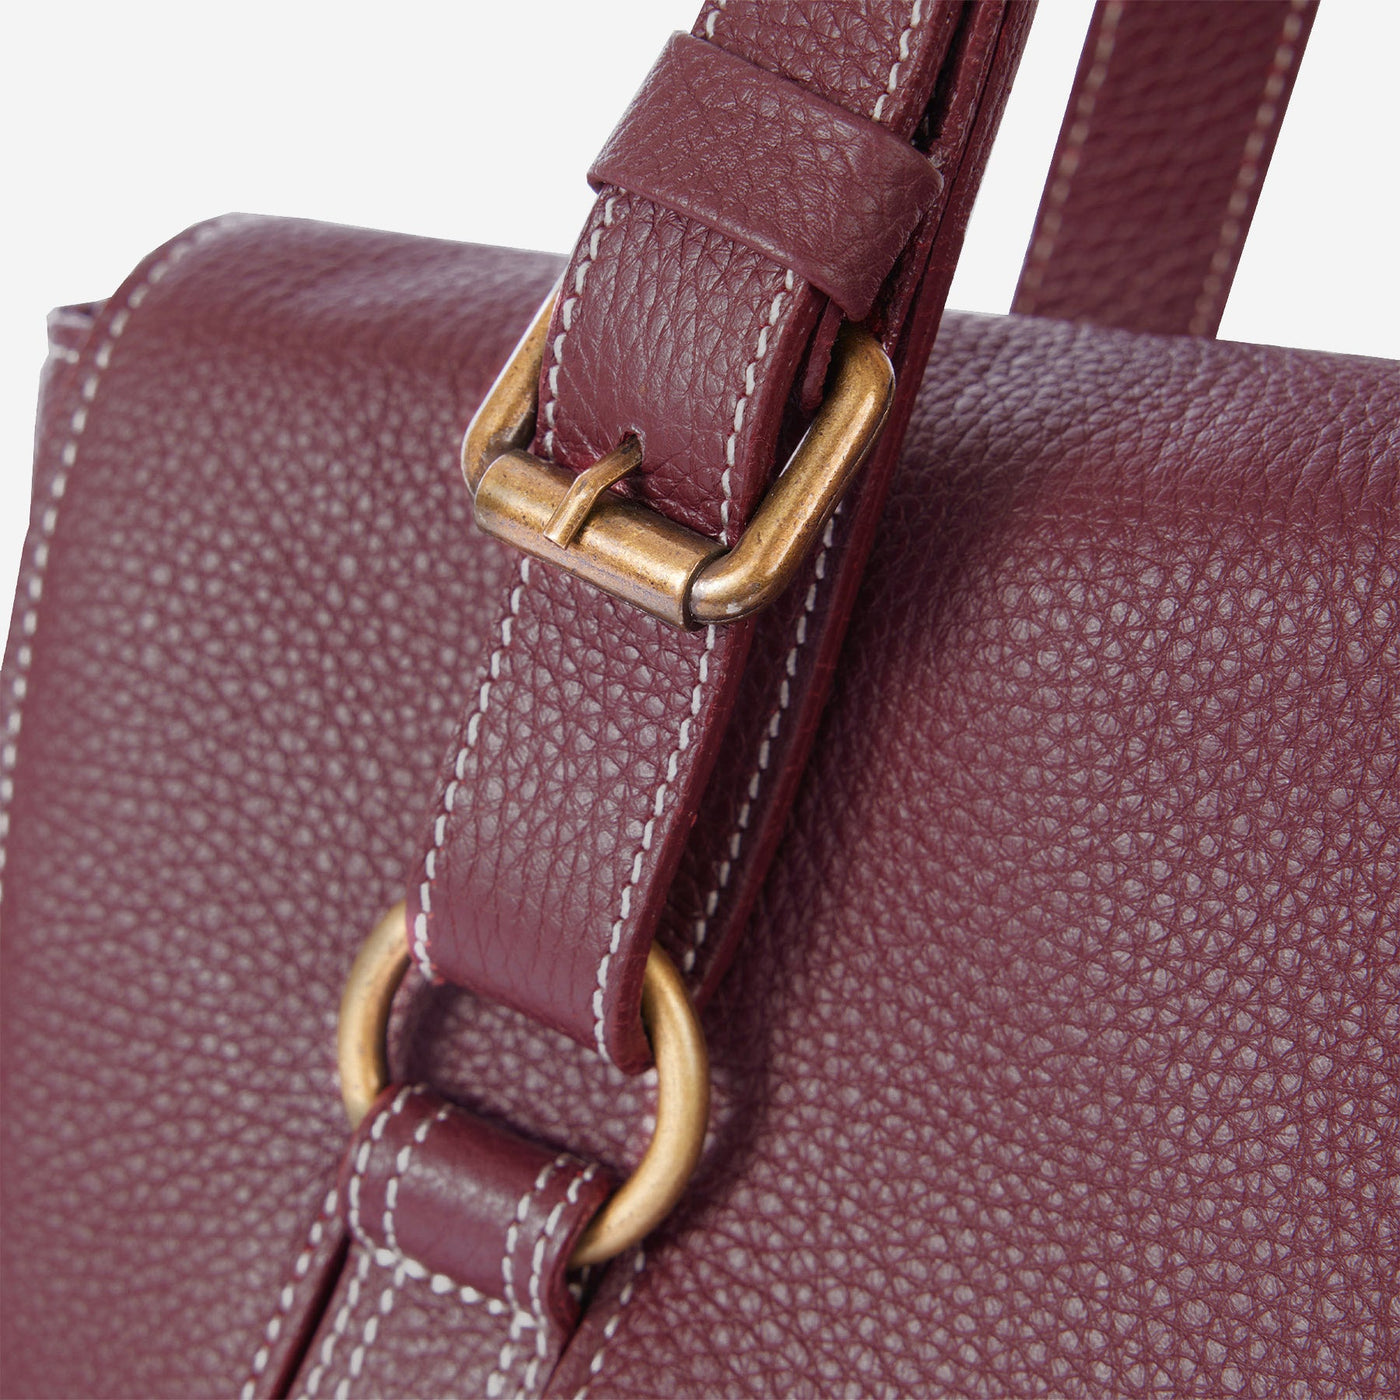 Paddock Lux Shoulder Bag in Pebbled Leather by Oughton